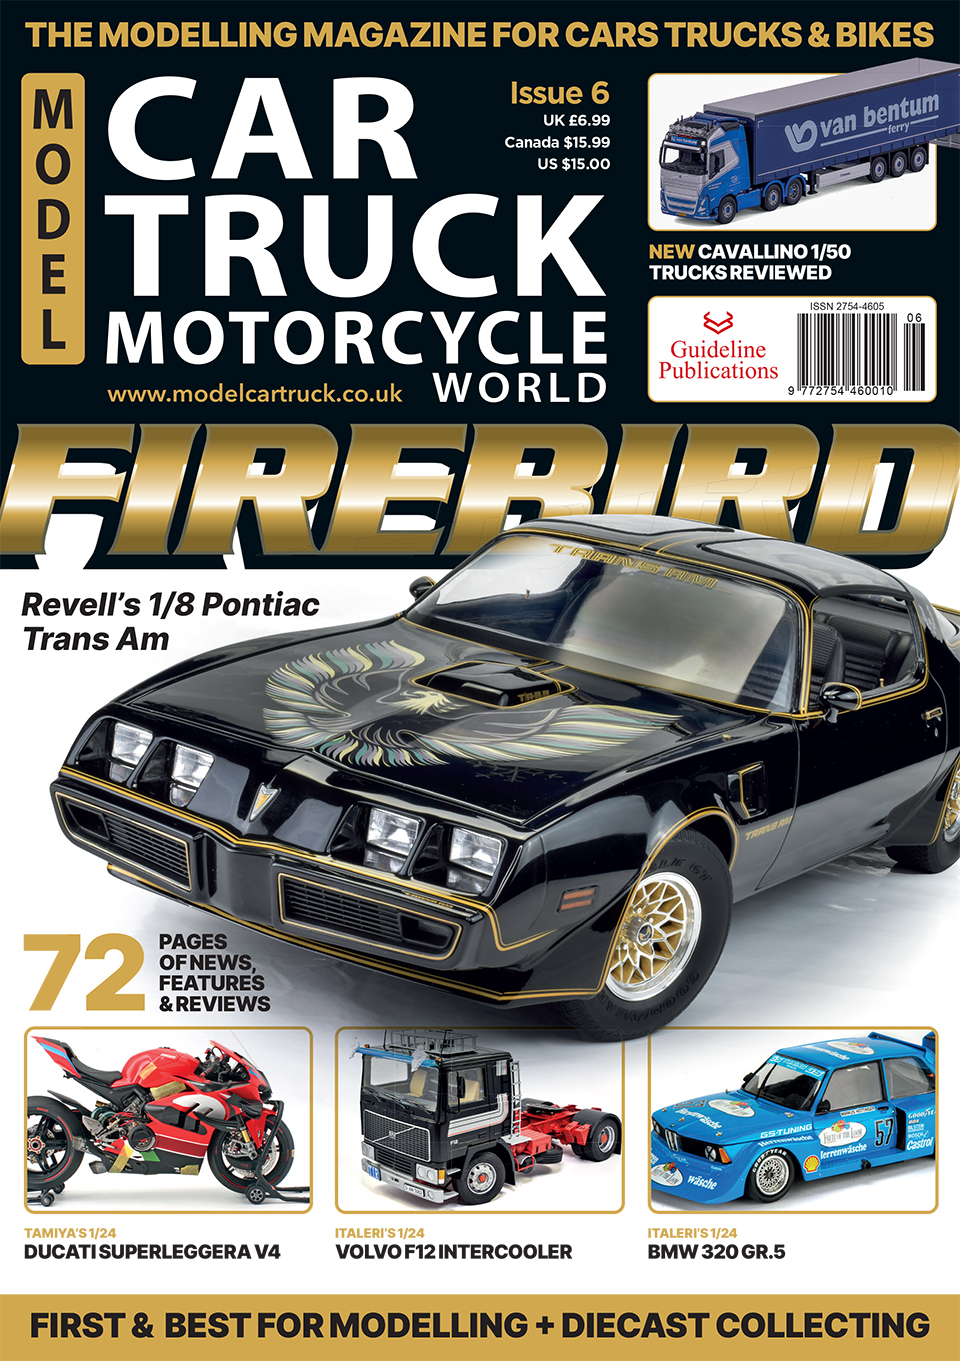 Guideline Publications Ltd Model Car Truck Motorcycle World no 6 Editor Andy Evans 